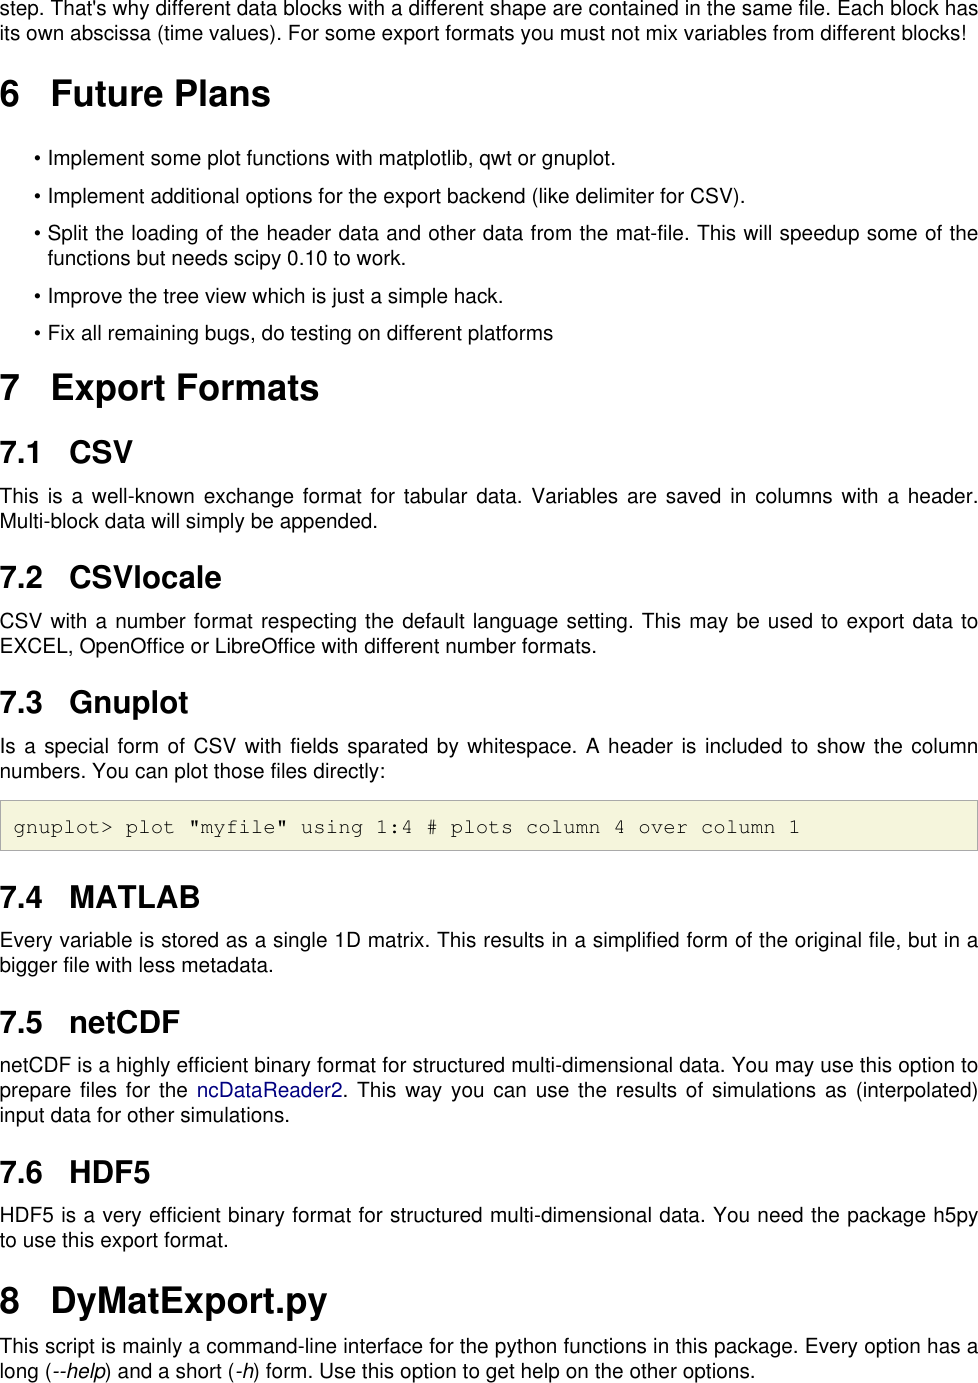 Page 3 of 7 - DyMat - User Manual Dy Mat-Guide